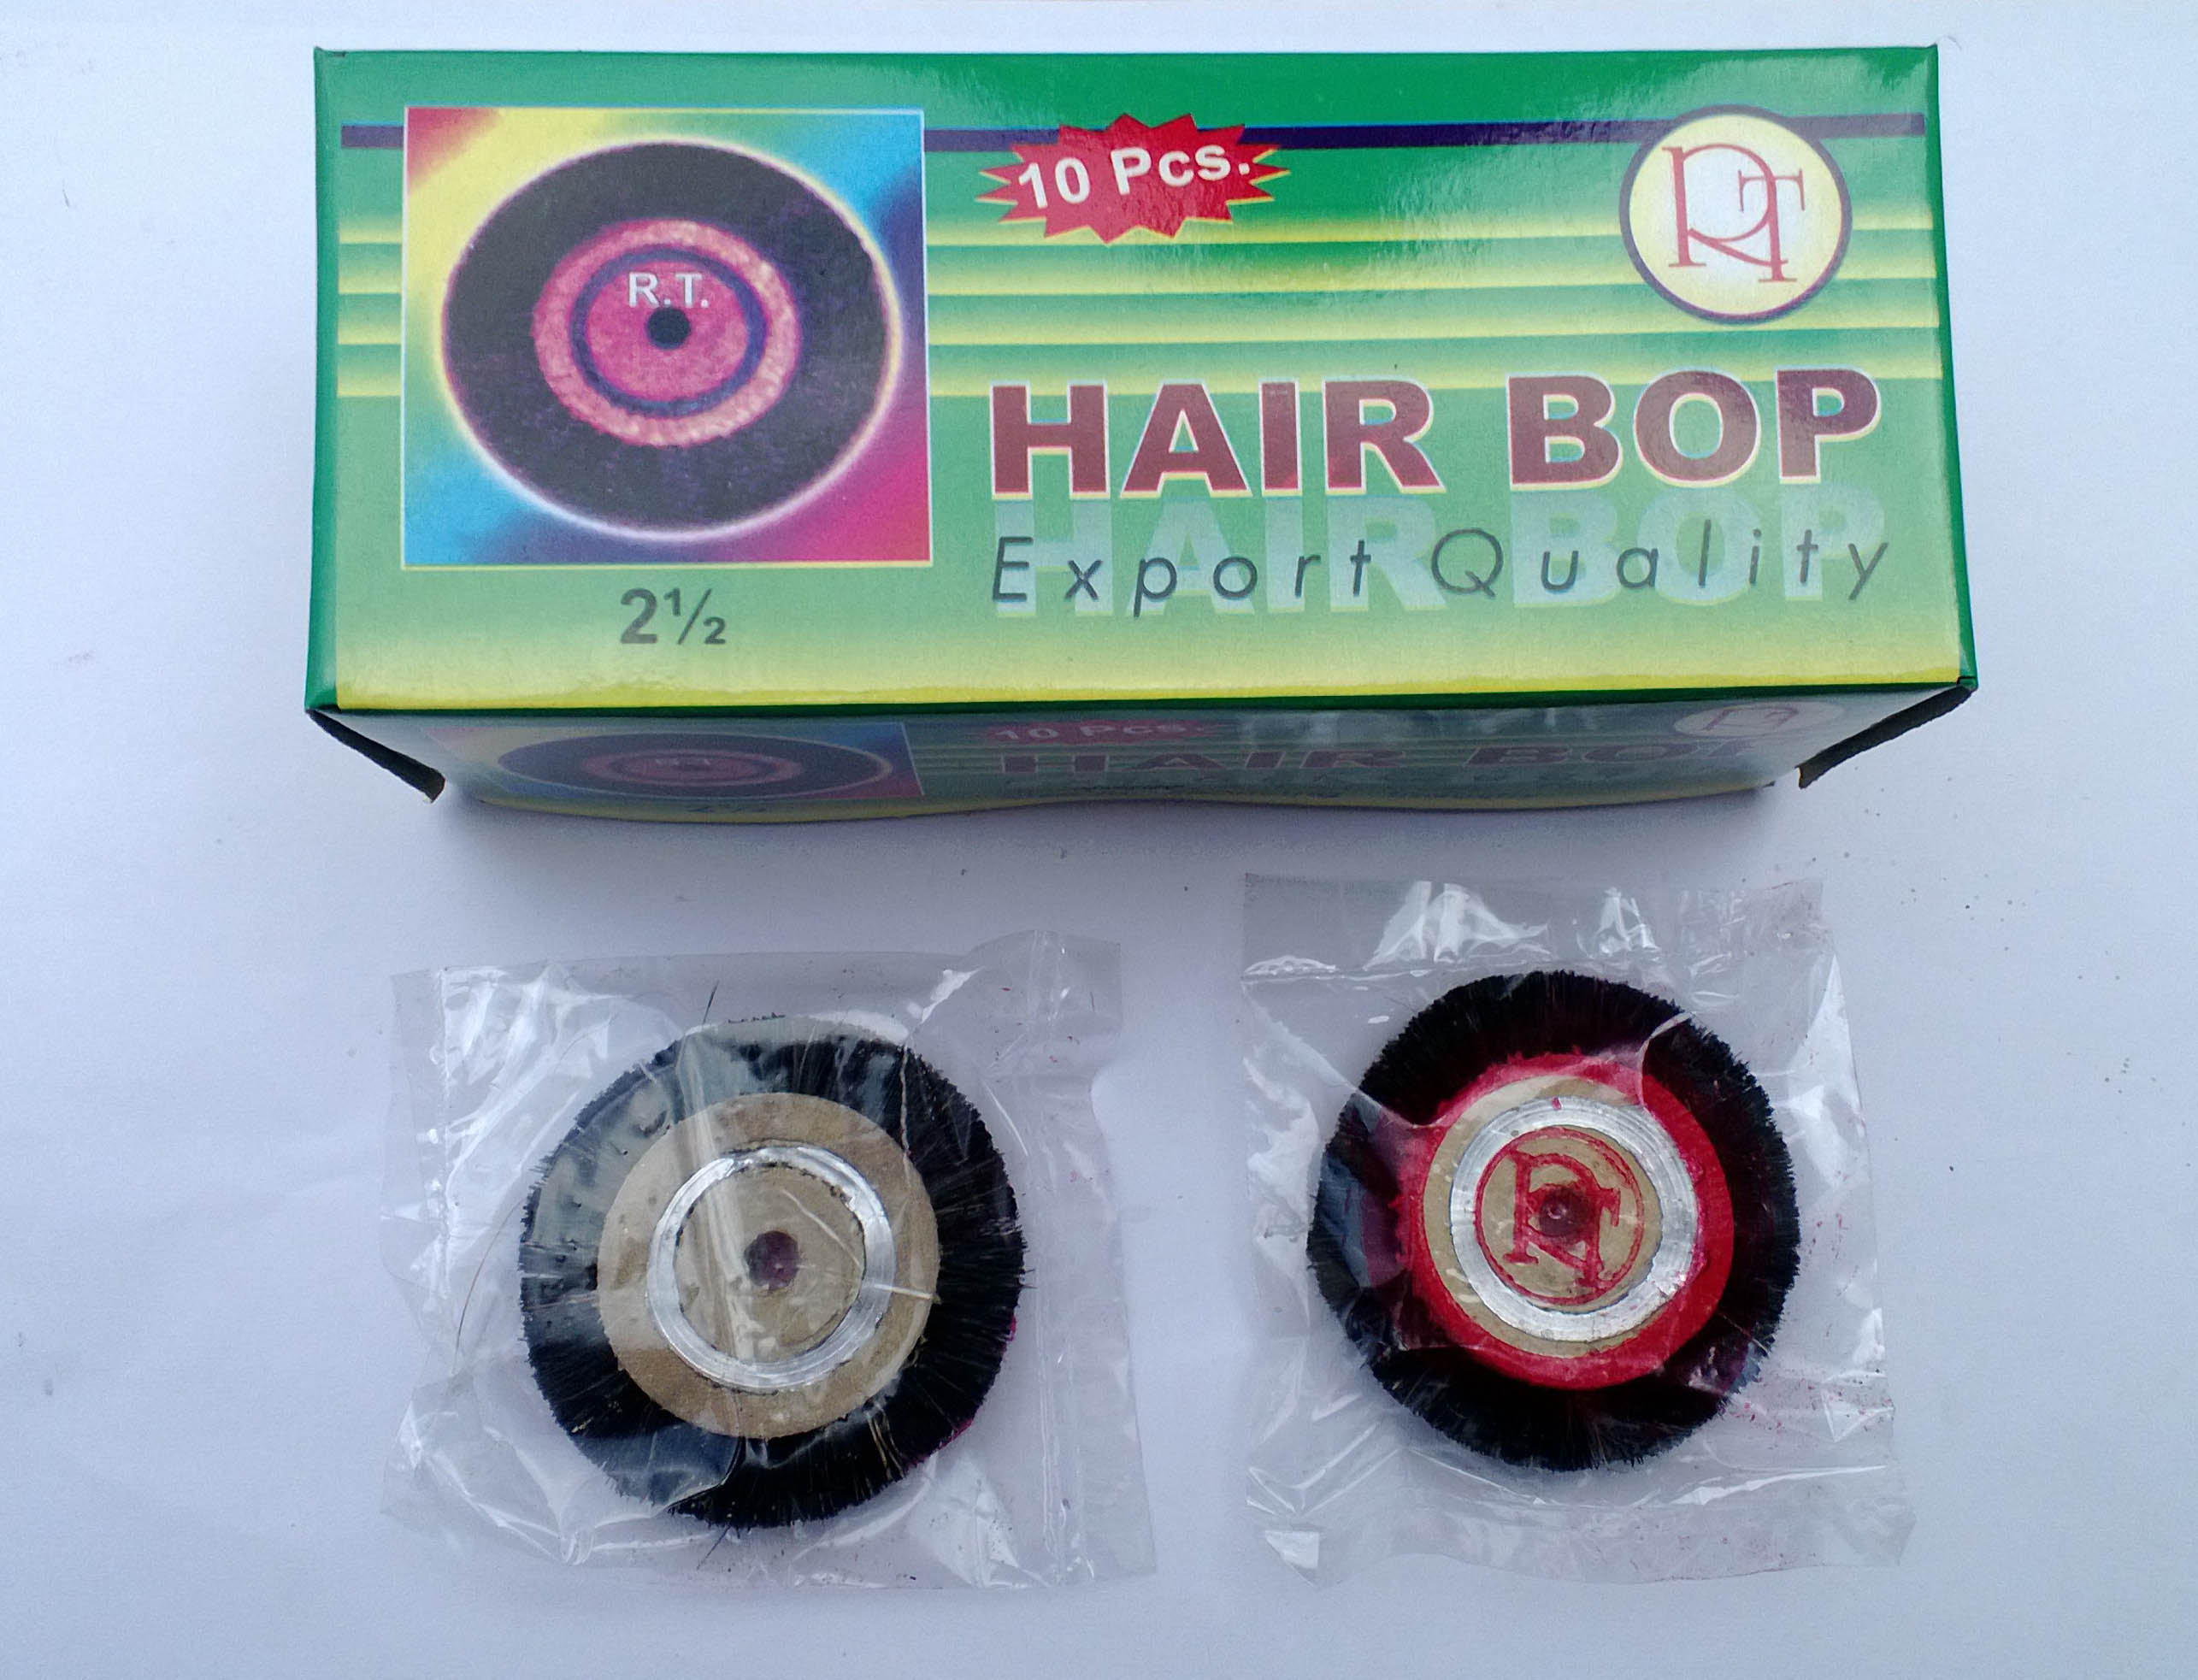 hair buff by RT INTERNATIONAL: Importer Of Jewellery Making Tools in India